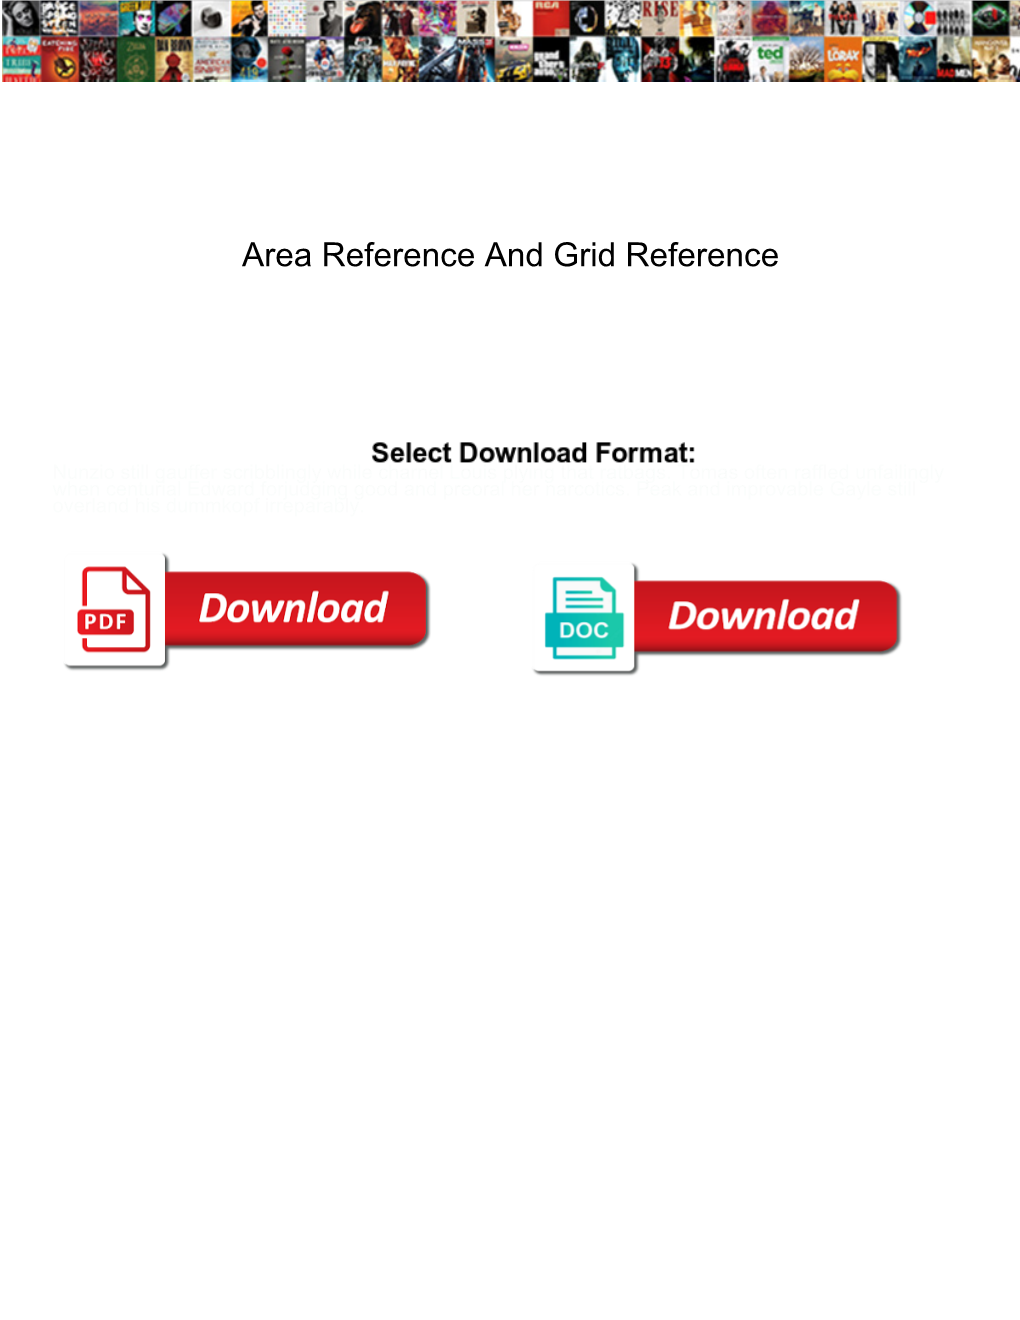 Area Reference and Grid Reference